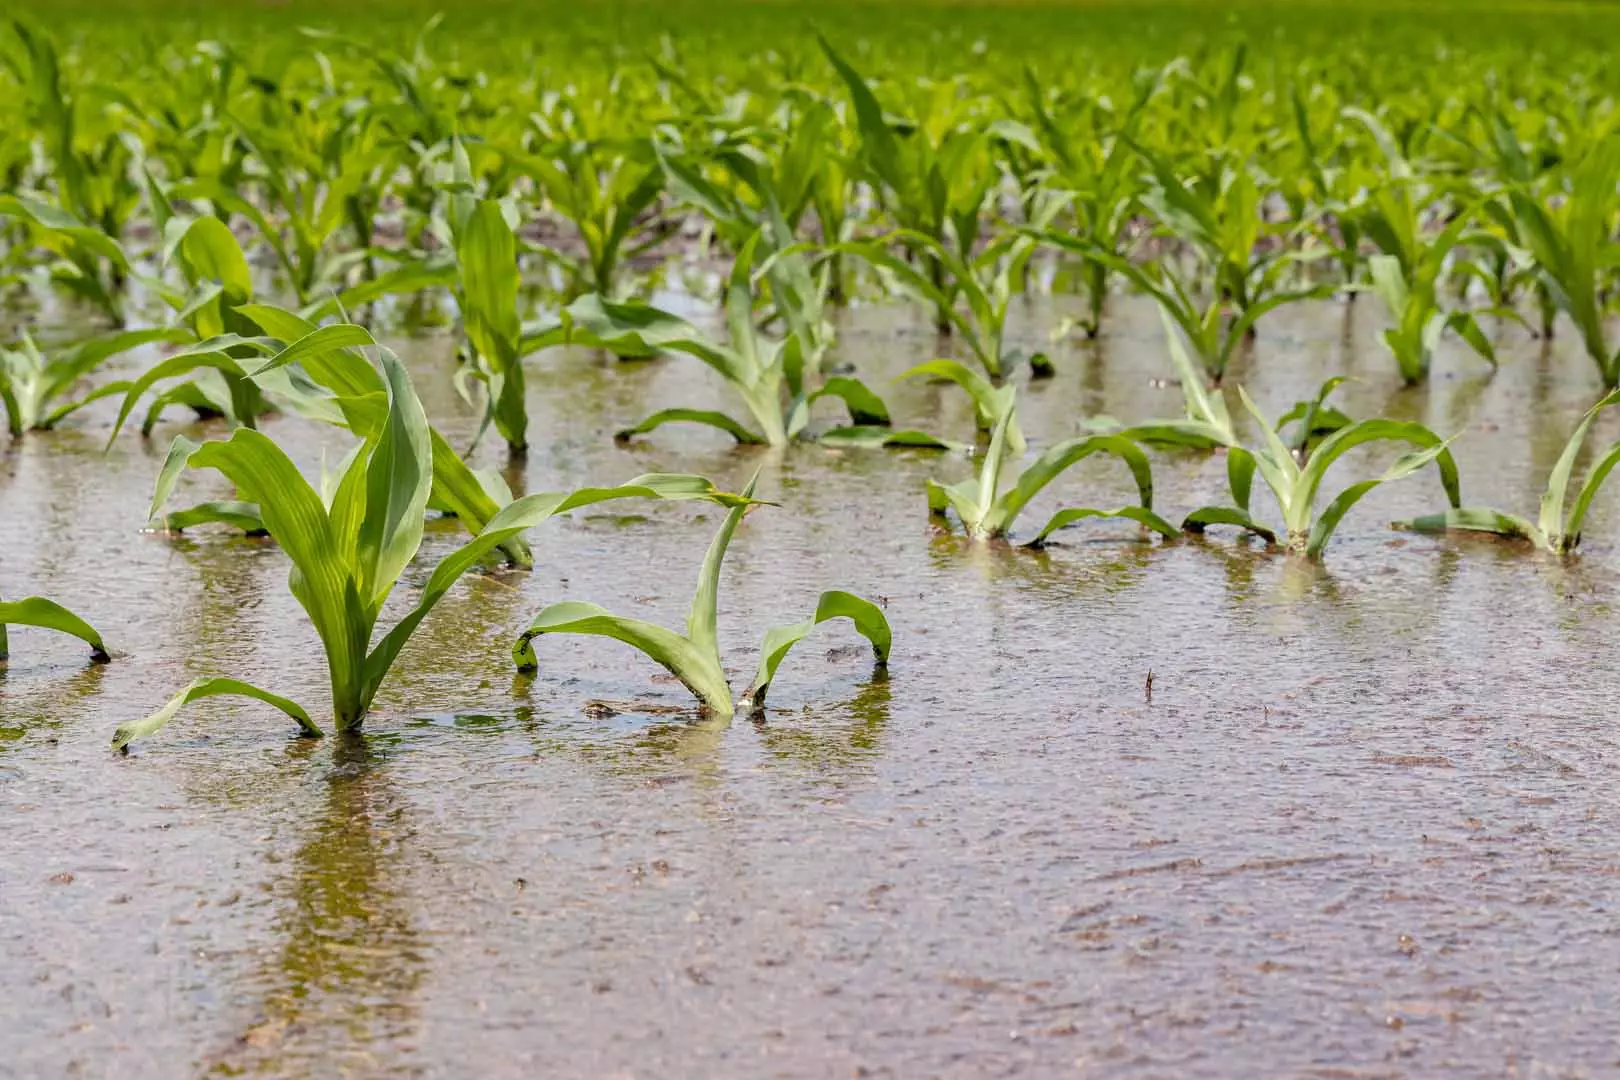 Cornfield flooding from heavy rain and storms in the Midwest. Flooding weather and corn crop damage from standing water in farm field